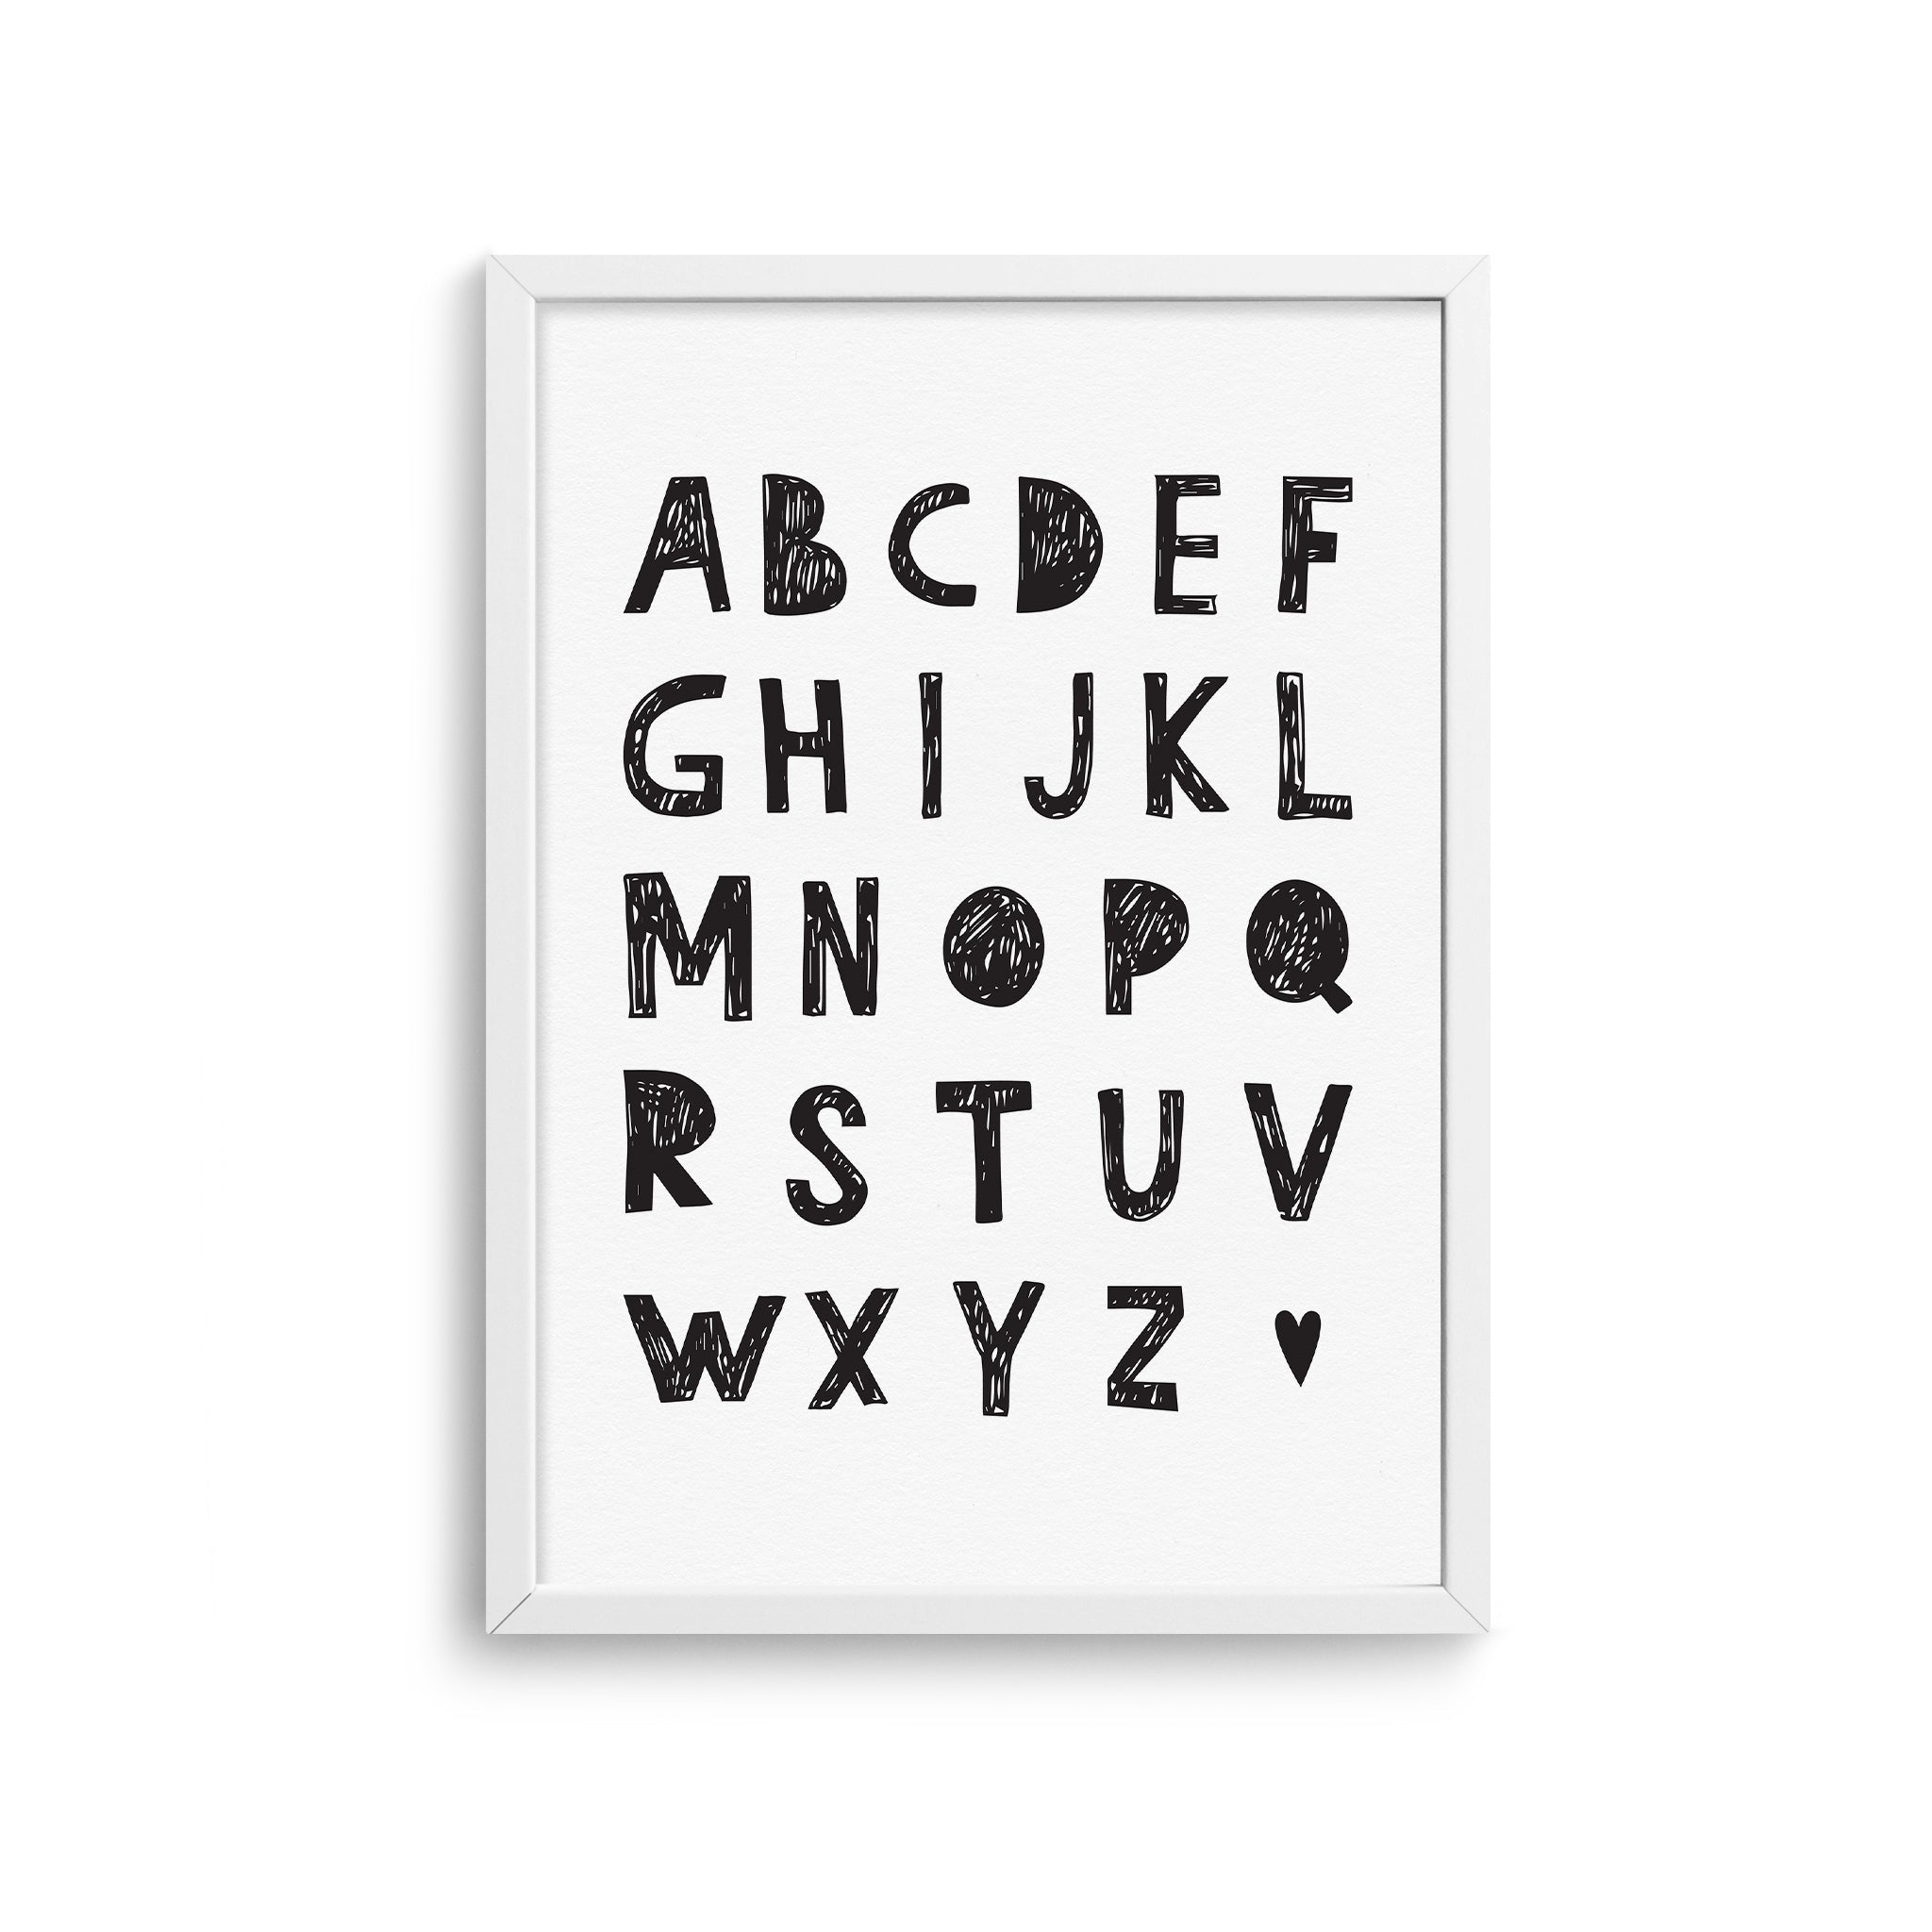 Black and White Poster Letters